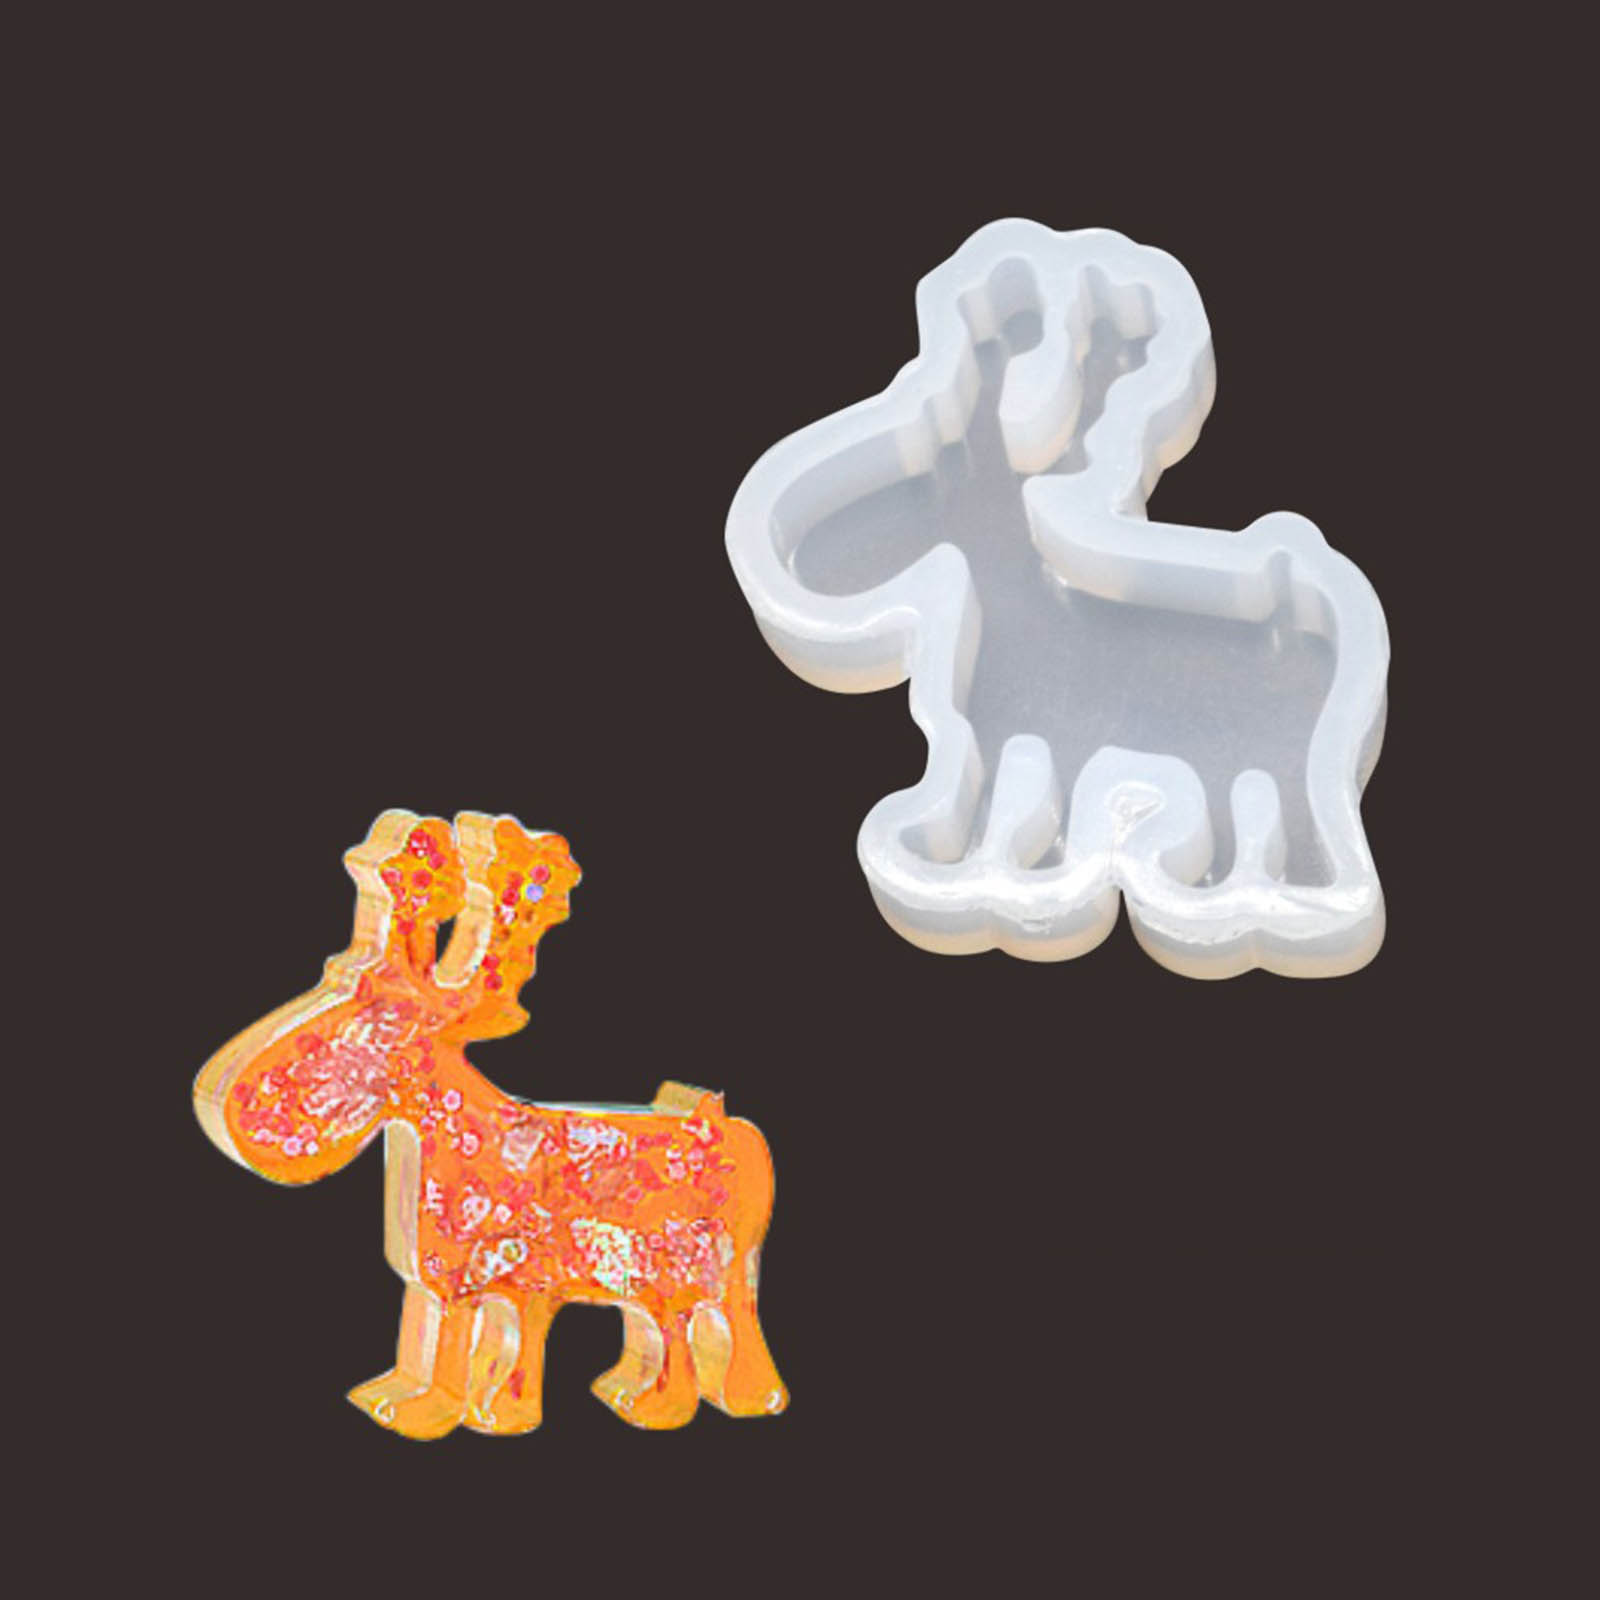 Picture of Silicone Resin Mold For Jewelry Making Pendant Hippo Animal White 3.8cm x 3.5cm, 1 Piece